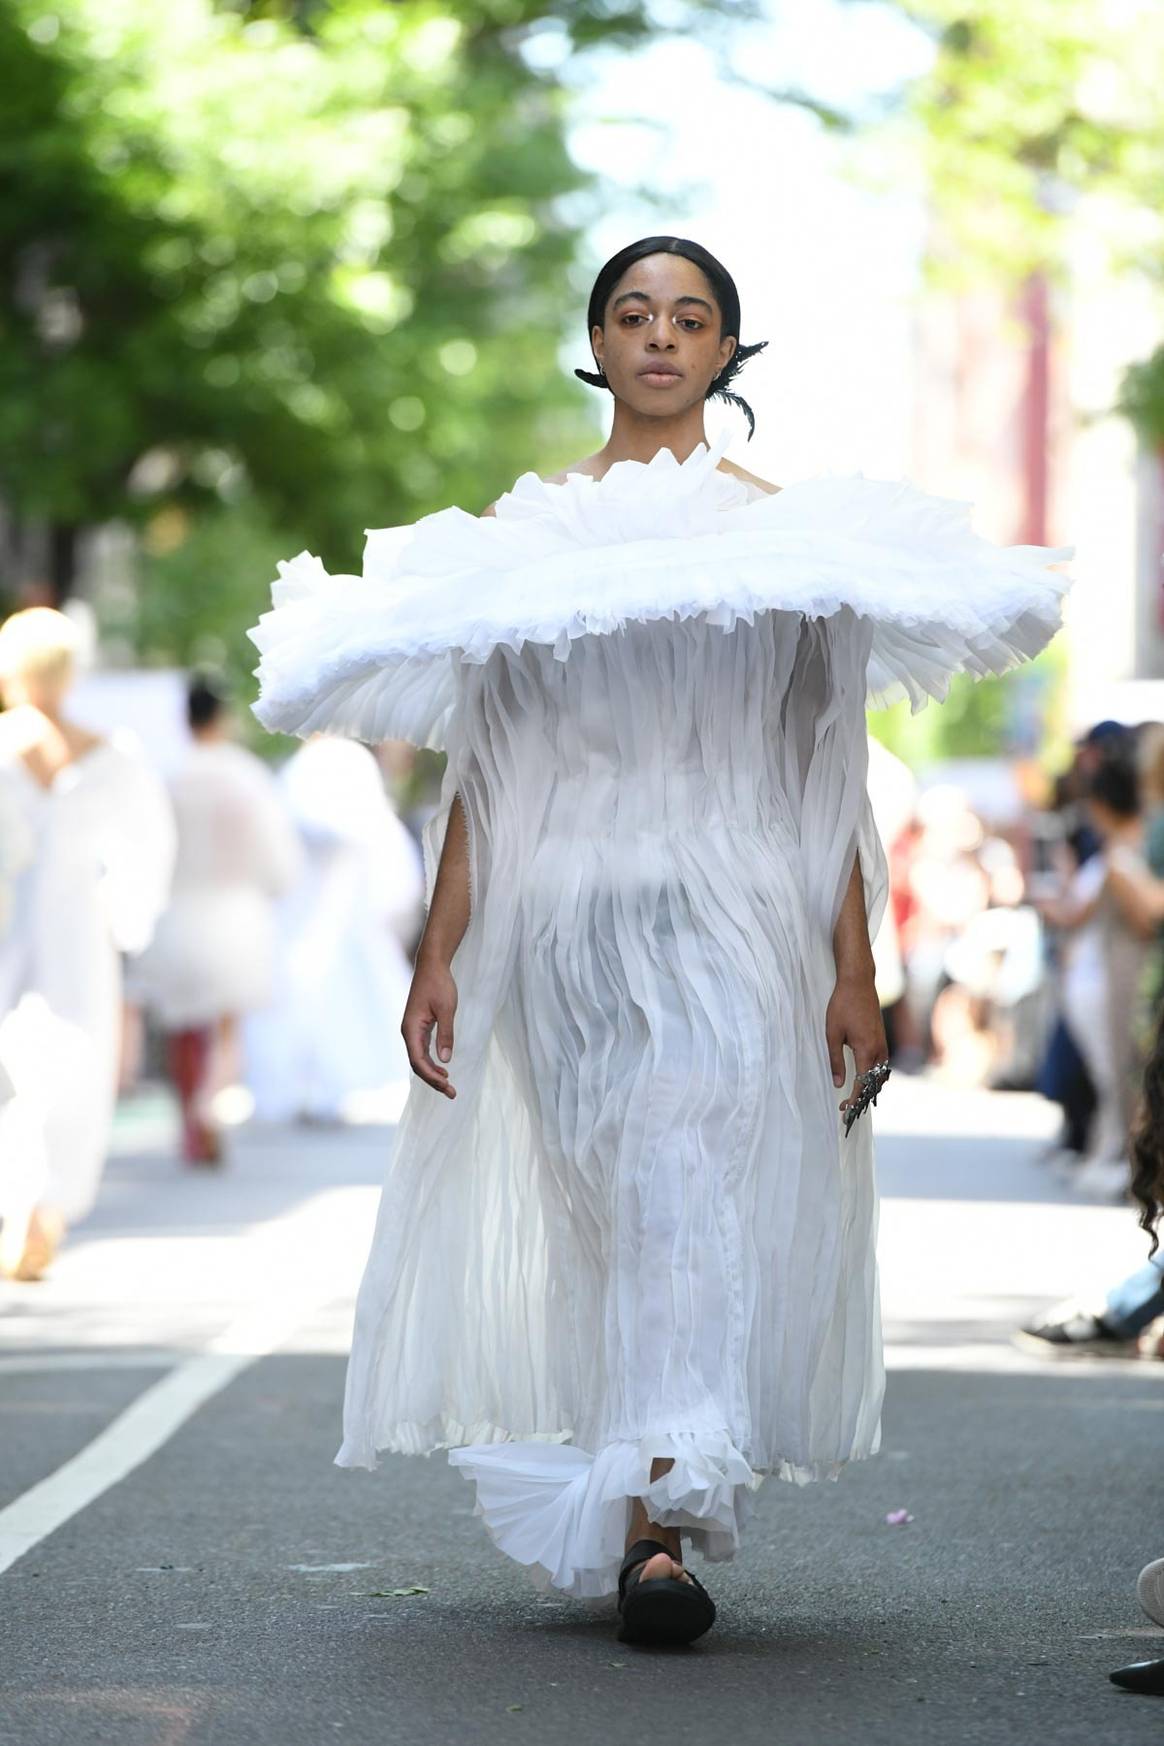 In pictures: Parsons first ever street fashion show